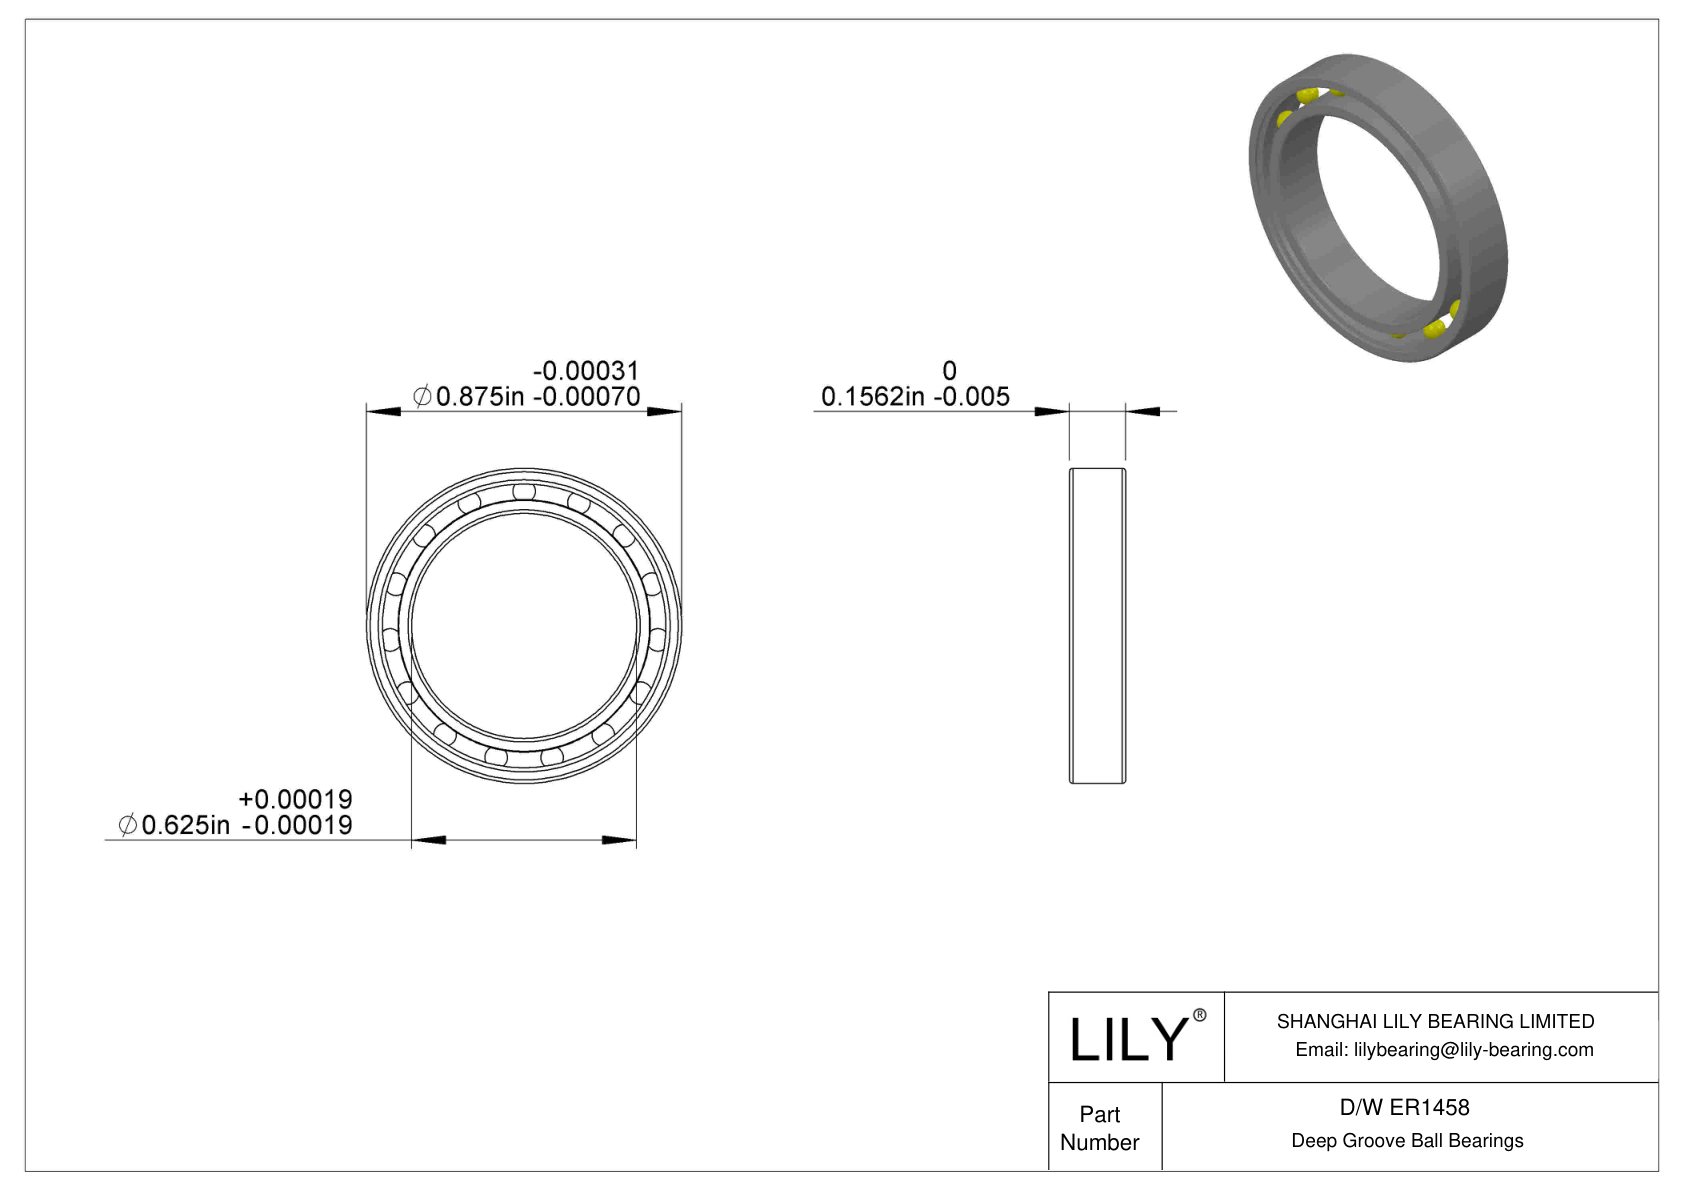 D/W ER1458 Stainless Steel Deep Groove Ball Bearings cad drawing